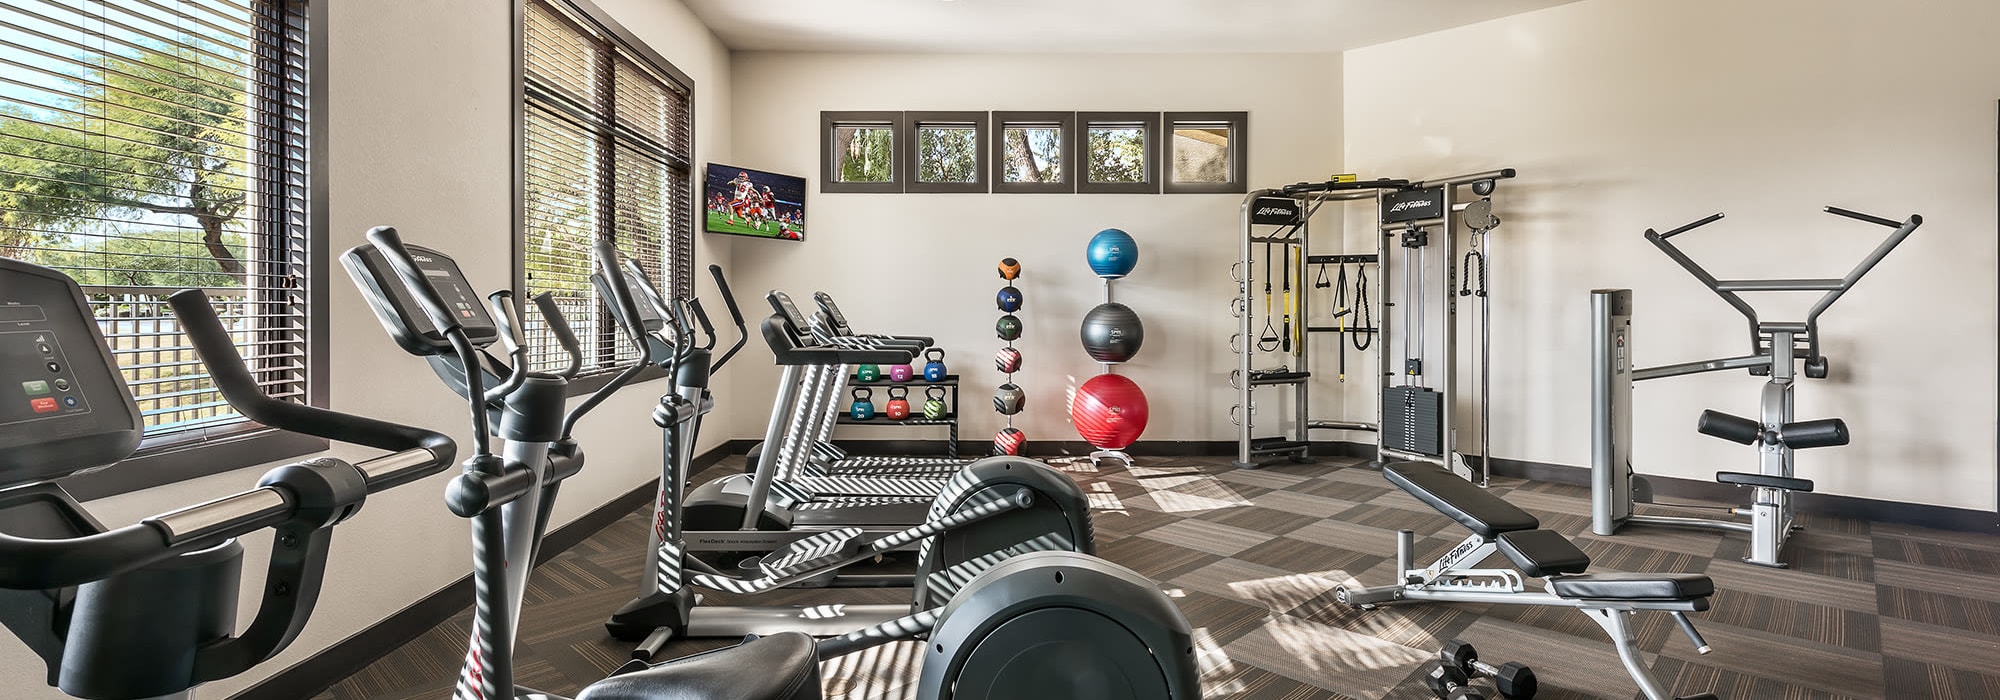 Fitness center at The Reserve at Gilbert Towne Centre in Gilbert, Arizona